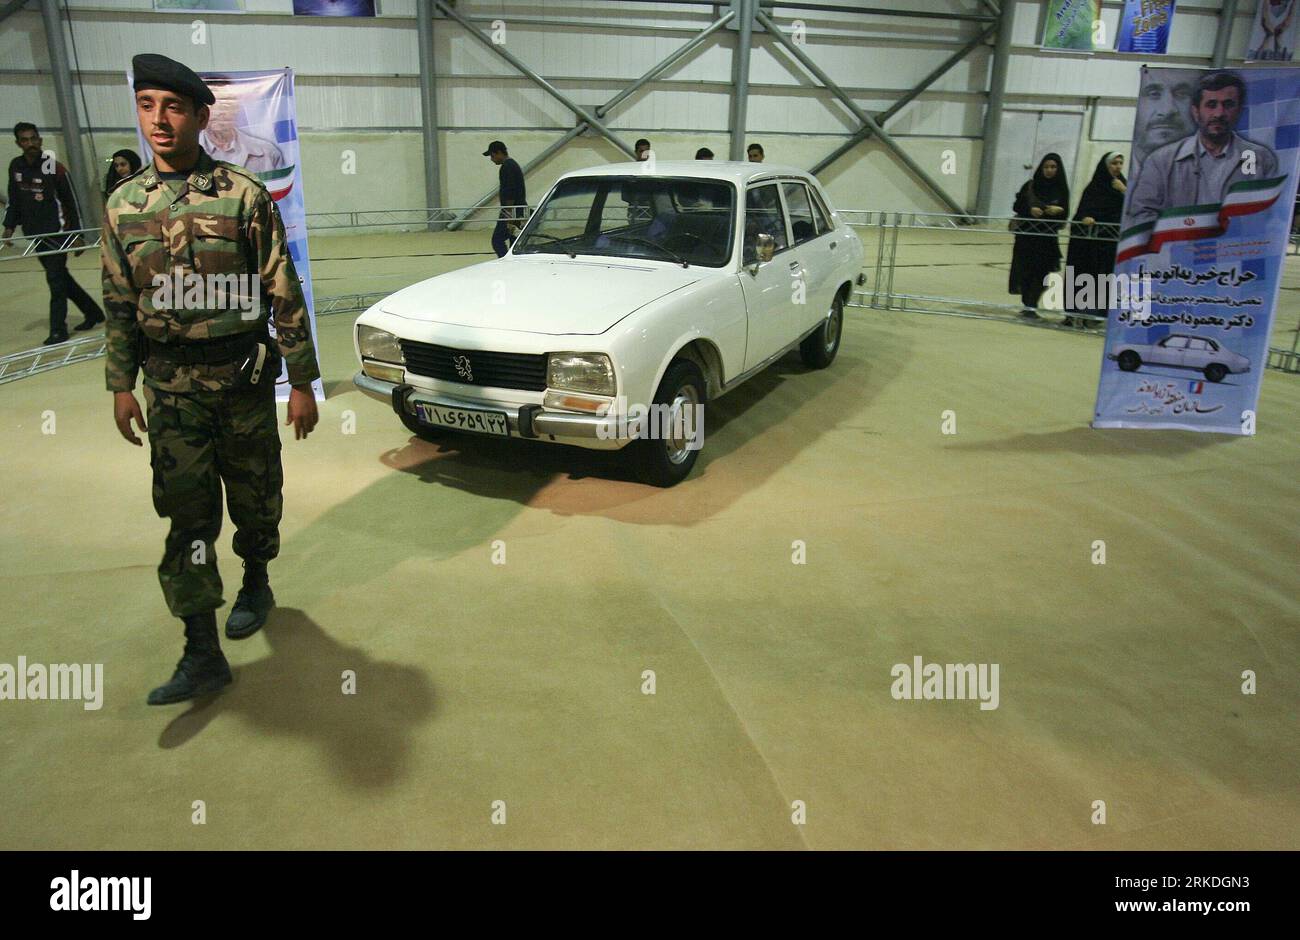 Bildnummer: 54946747  Datum: 23.02.2011  Copyright: imago/Xinhua (110224) -- TEHRAN, Feb. 24, 2011 (Xinhua) -- Iranian president s car is displayed during the First International Car Exhibition in Arvand Free Zone in southwest Iran, Feb. 23, 2011. Iranian President Mahmoud Ahmadinejad s ancient Peugeot 504 is put up to auction for charity during the exhibition, which opened here on Wednesday. At the end of last year, Iranian president said he wanted to sell his car to help a housing project in his country. (Xinhua/Ahmad Halabisaz) IRAN-PRESIDENT S CAR-EXHIBITION PUBLICATIONxNOTxINxCHN Objekte Stock Photo